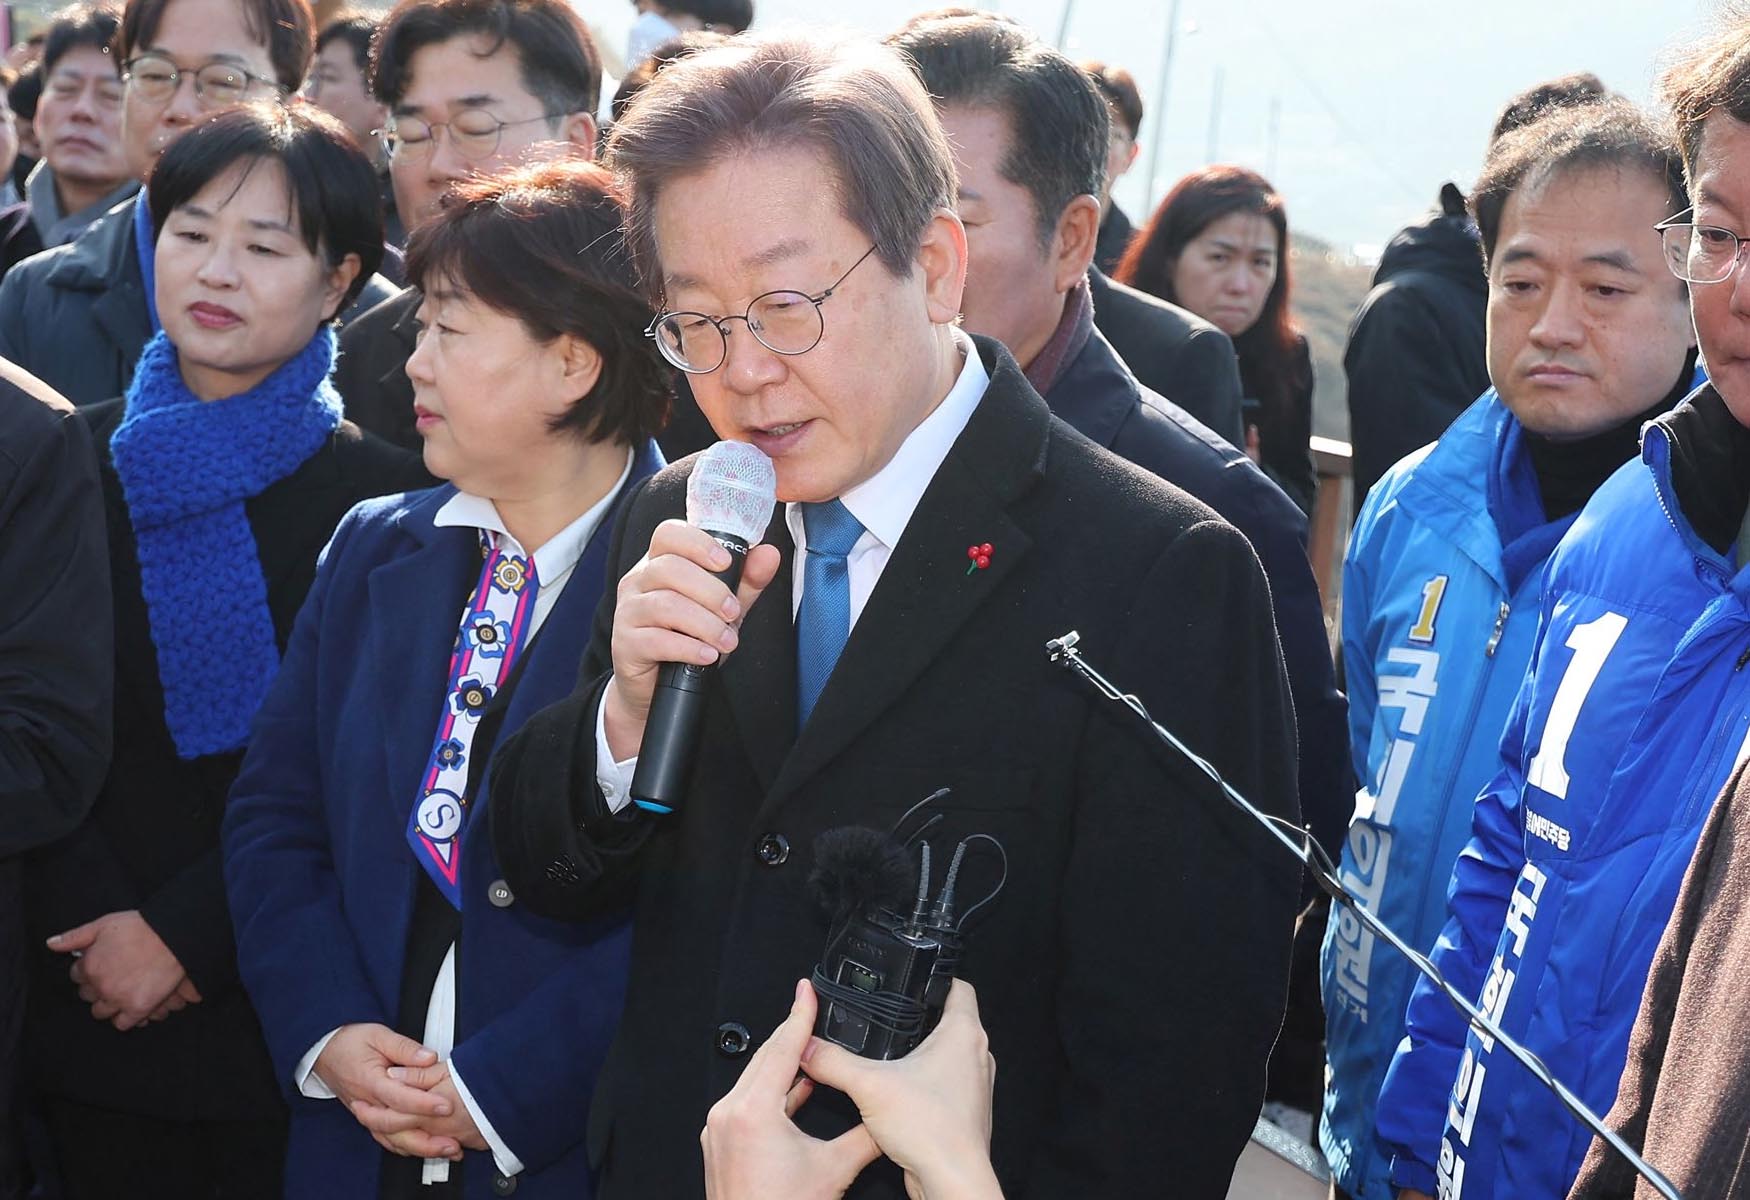 South Korean Democratic Party Leader Lee Jae-myung Stabbed In Neck During Press Conference